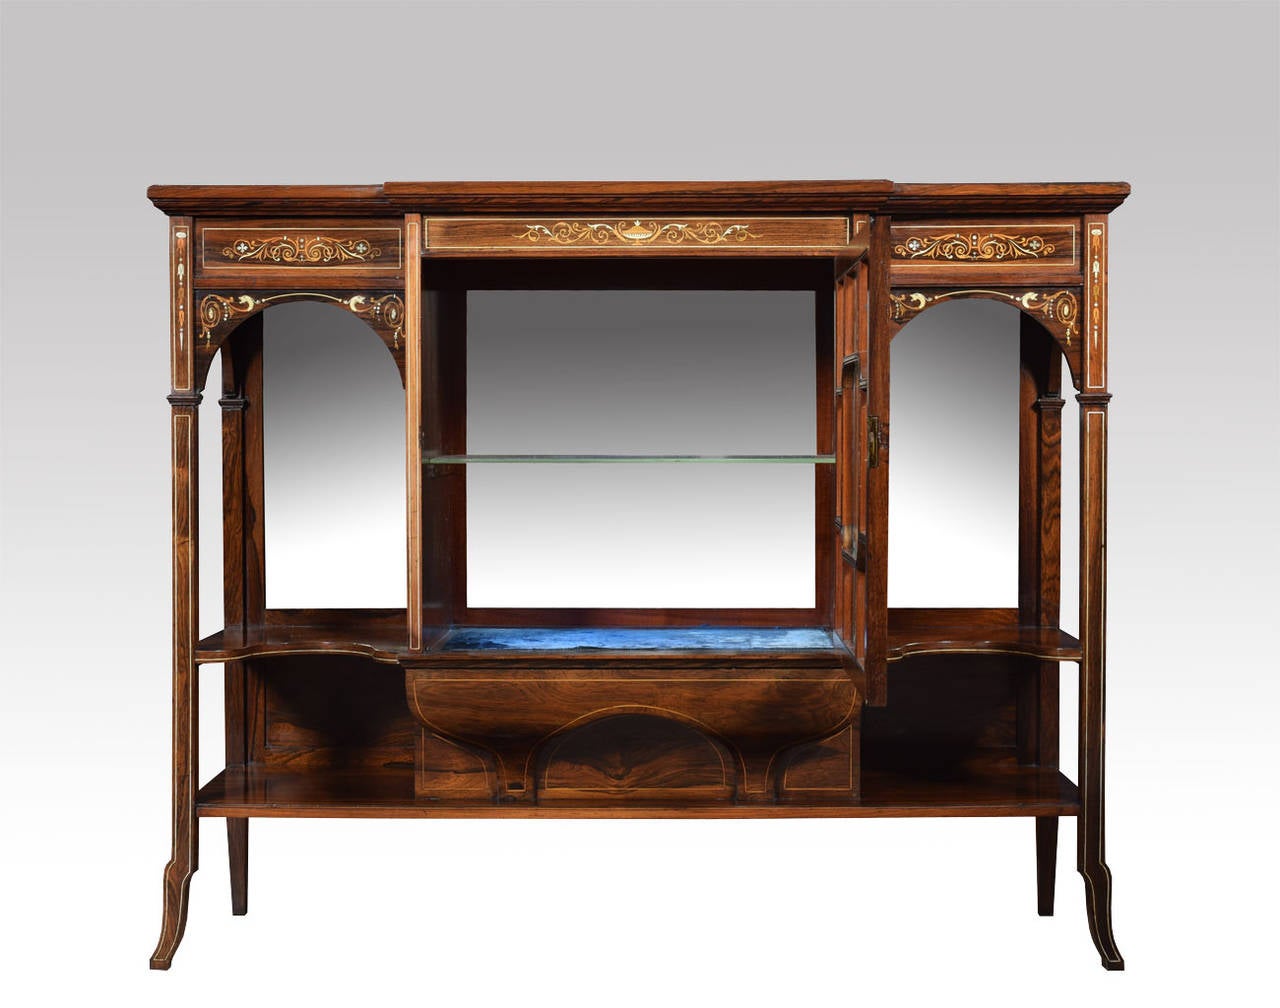 19th century rosewood inlaid breakfront display cabinet the rectangular top above central draw with glazed panel door below enclosing a mirrored and velvet lined interior, flanked by open shaped shelves with mirrors behind, raised on slender legs